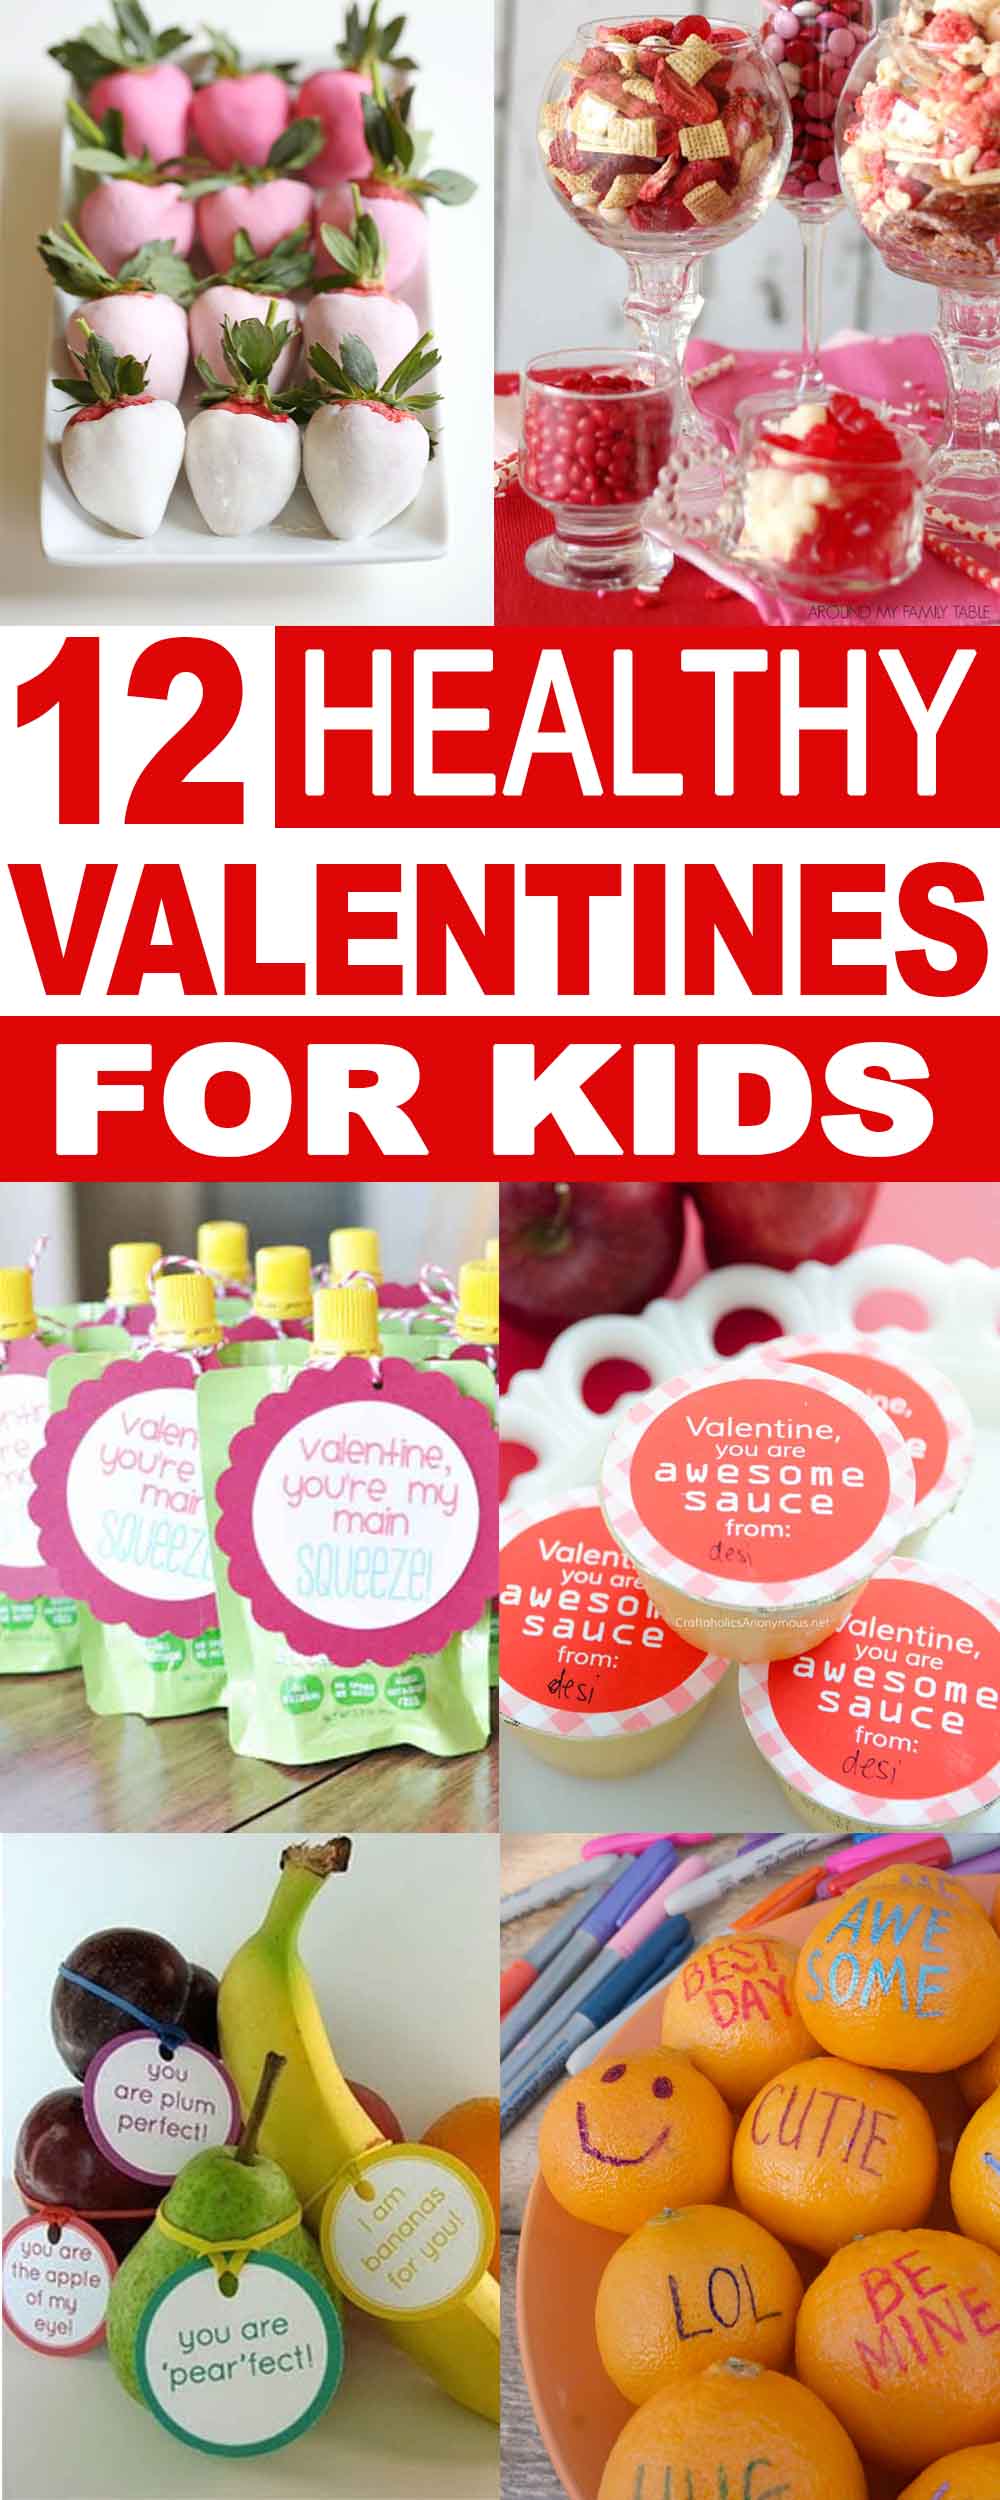 12 Healthy Valentines for Kids. Sick of your kids coming home from school with bags full of candy? Send them with these healthy valentines to give to their friends and be a hit with the parents! #valentines #healthy #healthyValentines